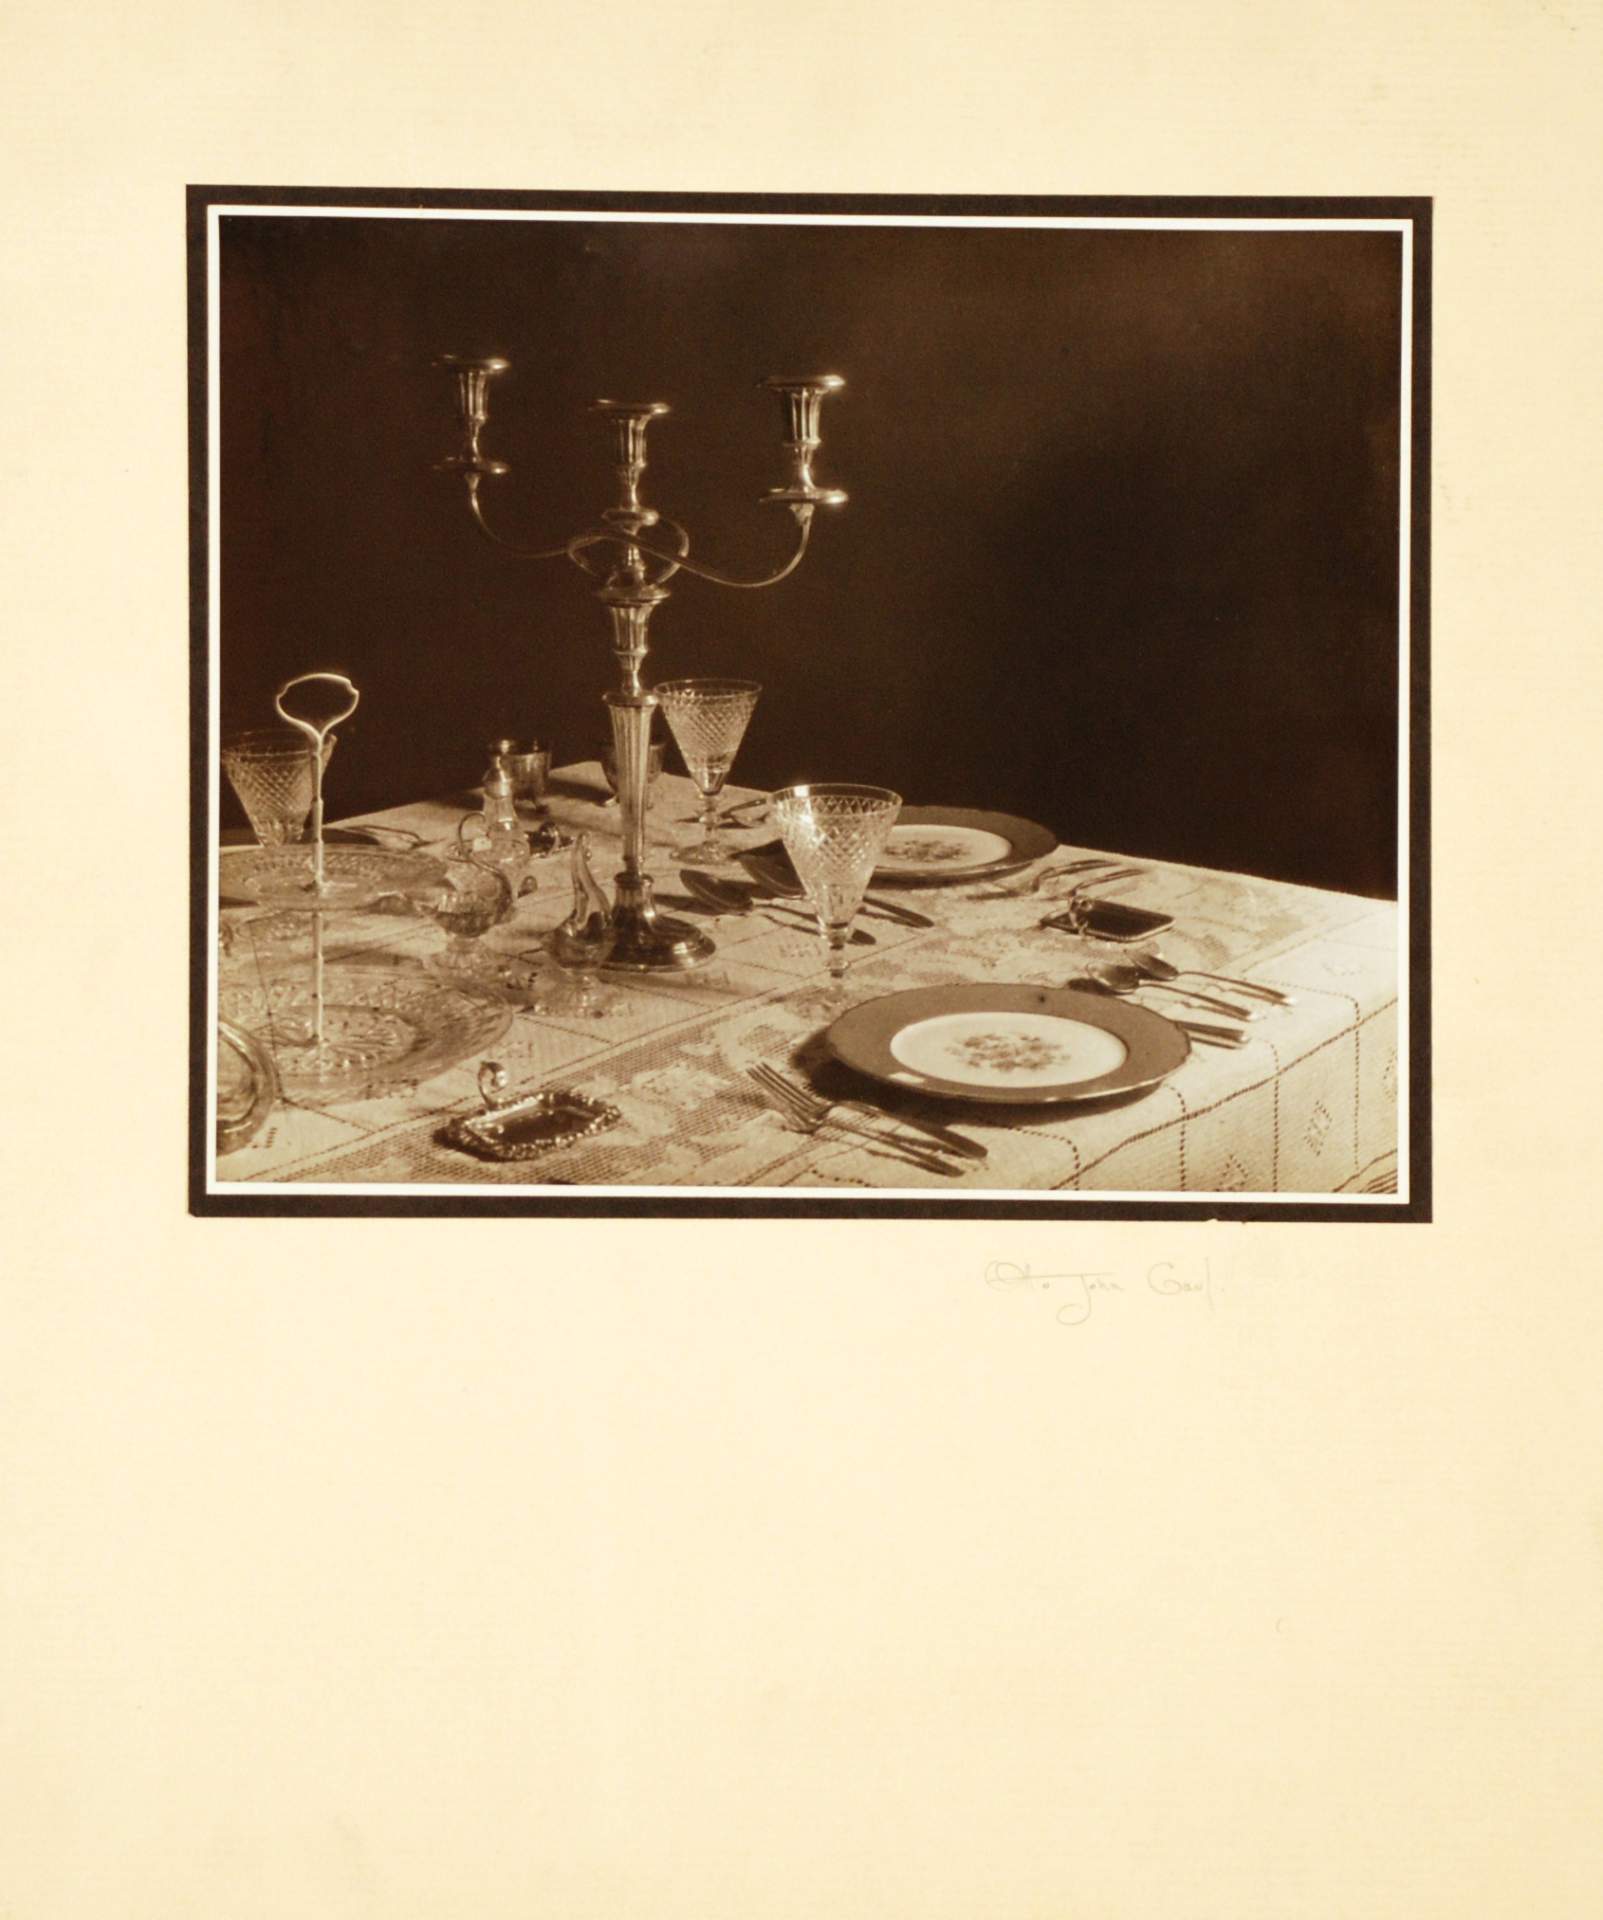 Untitled [dining table setting]